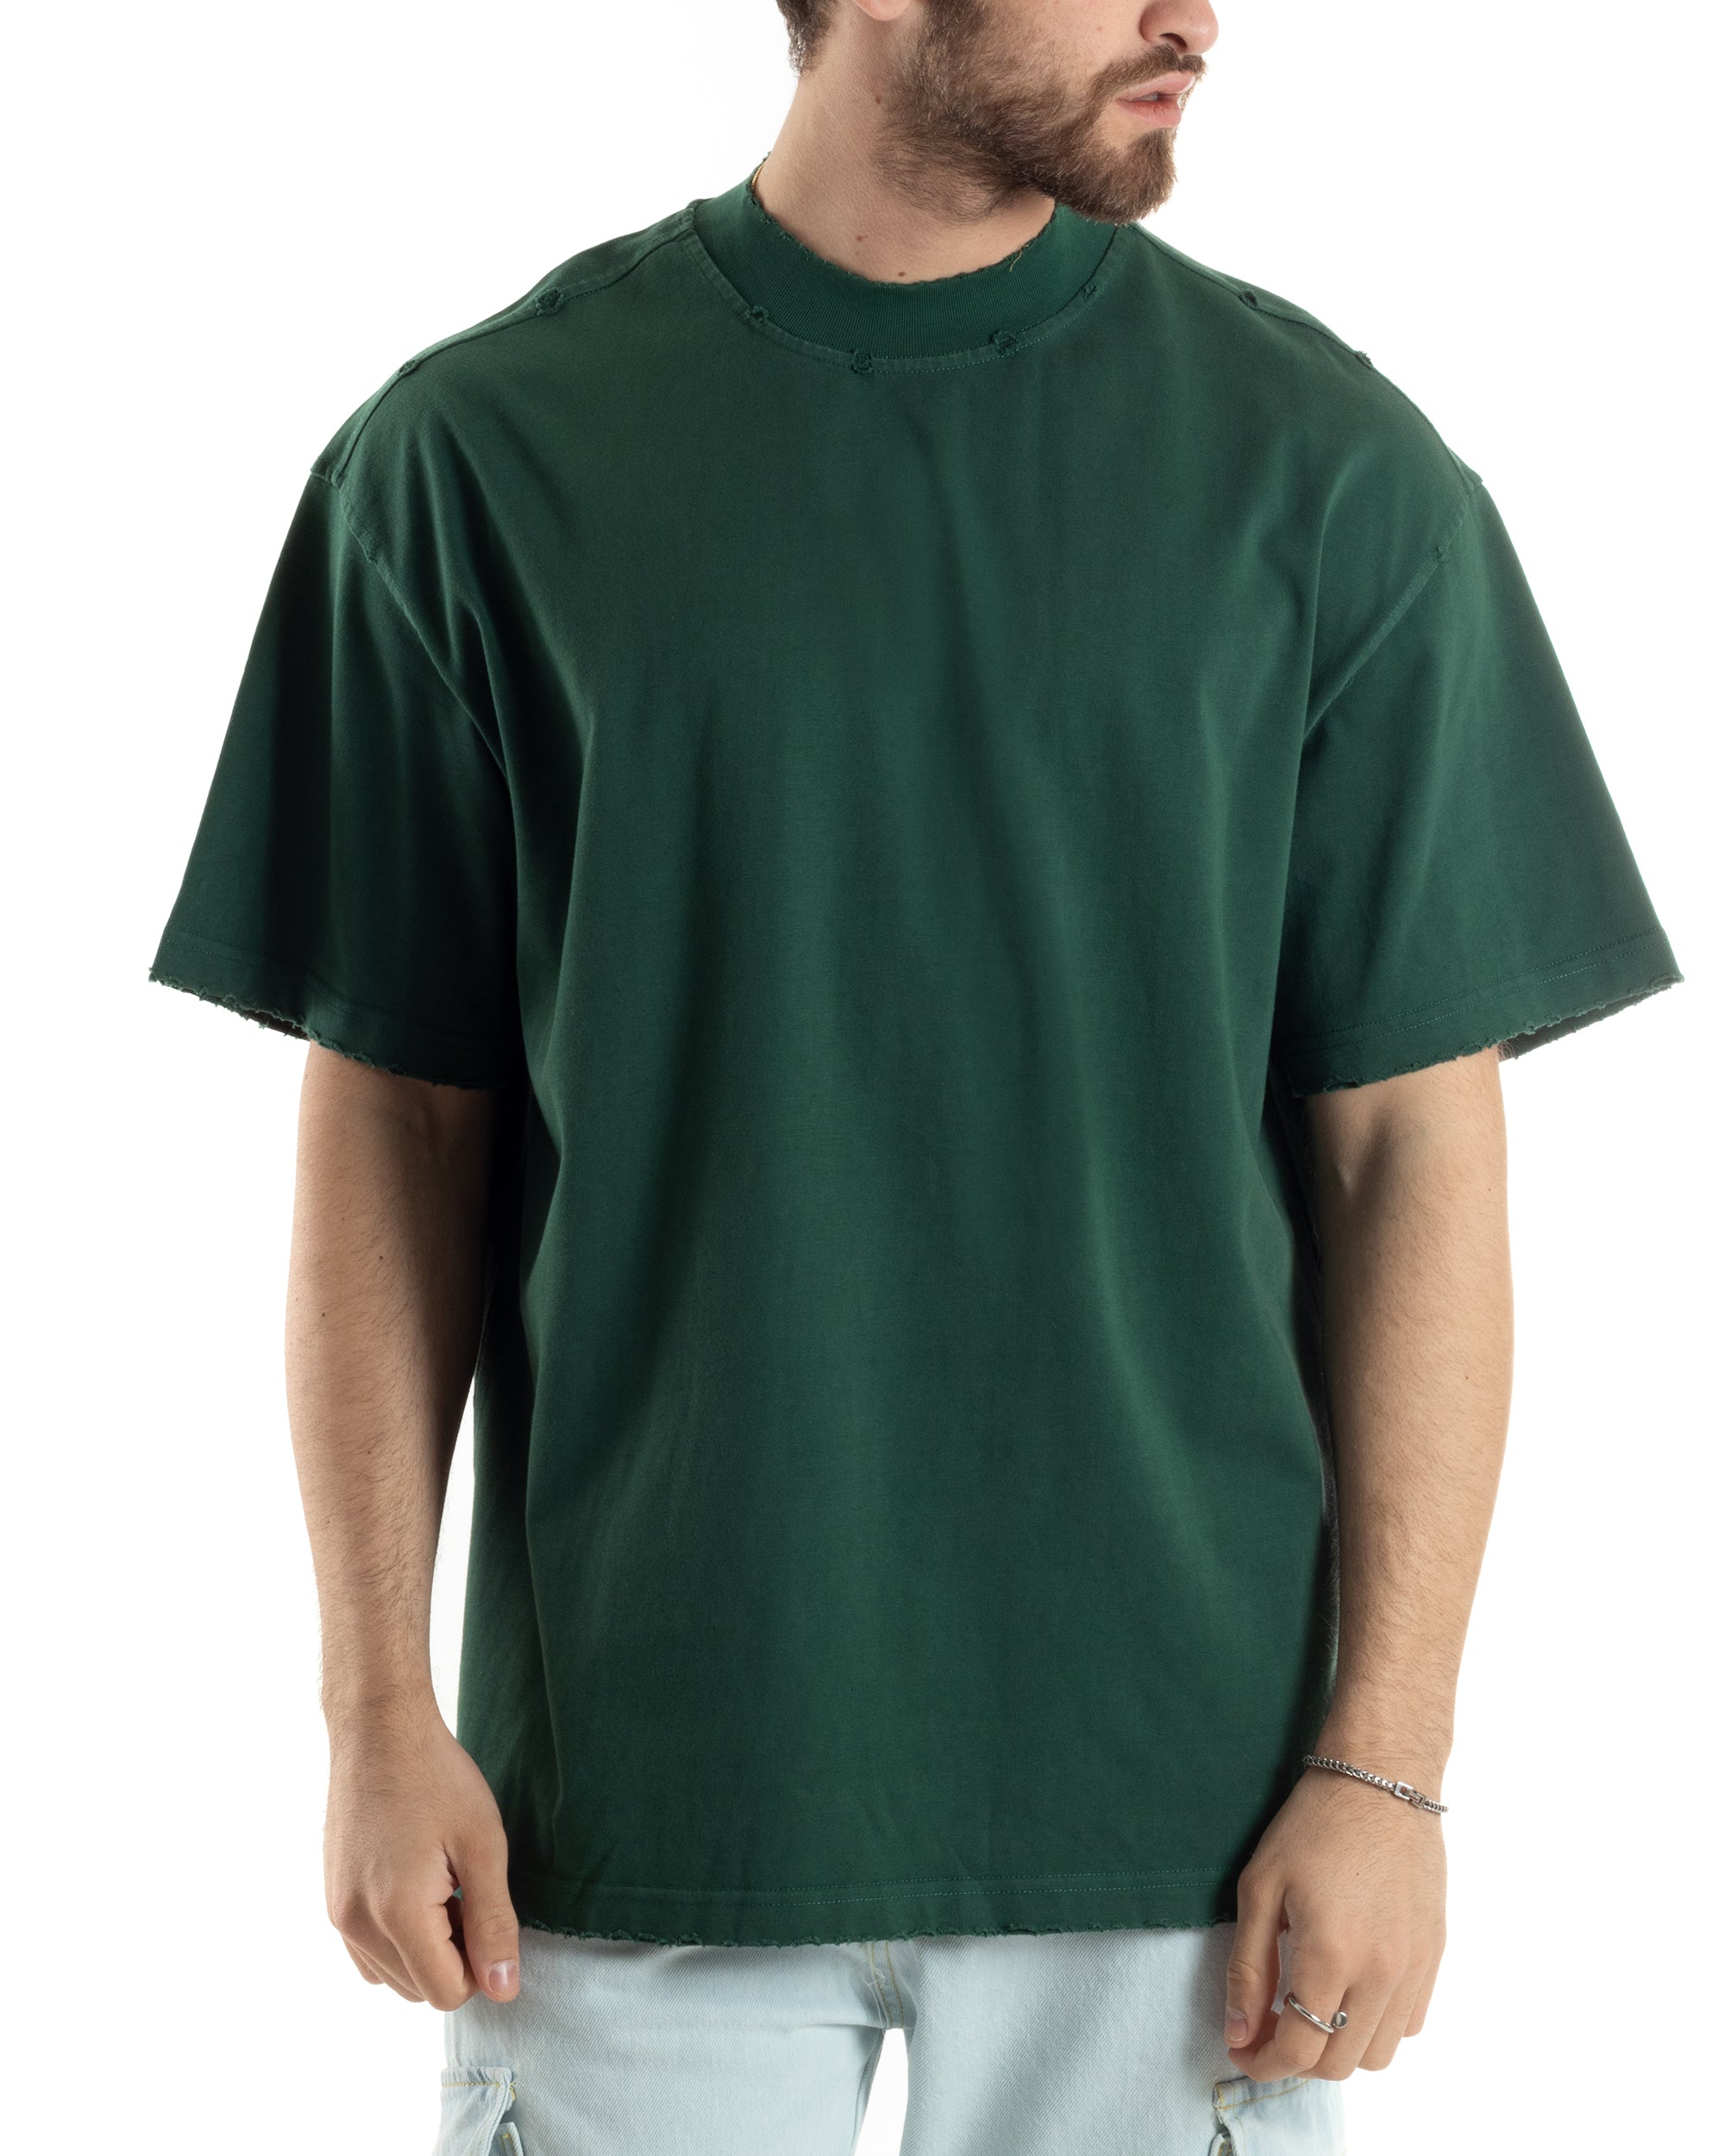 T-shirt Uomo Girocollo Boxy Fit Cotone Basic Con Rotture Relaxed Fit Gola Alta Verde GIOSAL-TS3014A